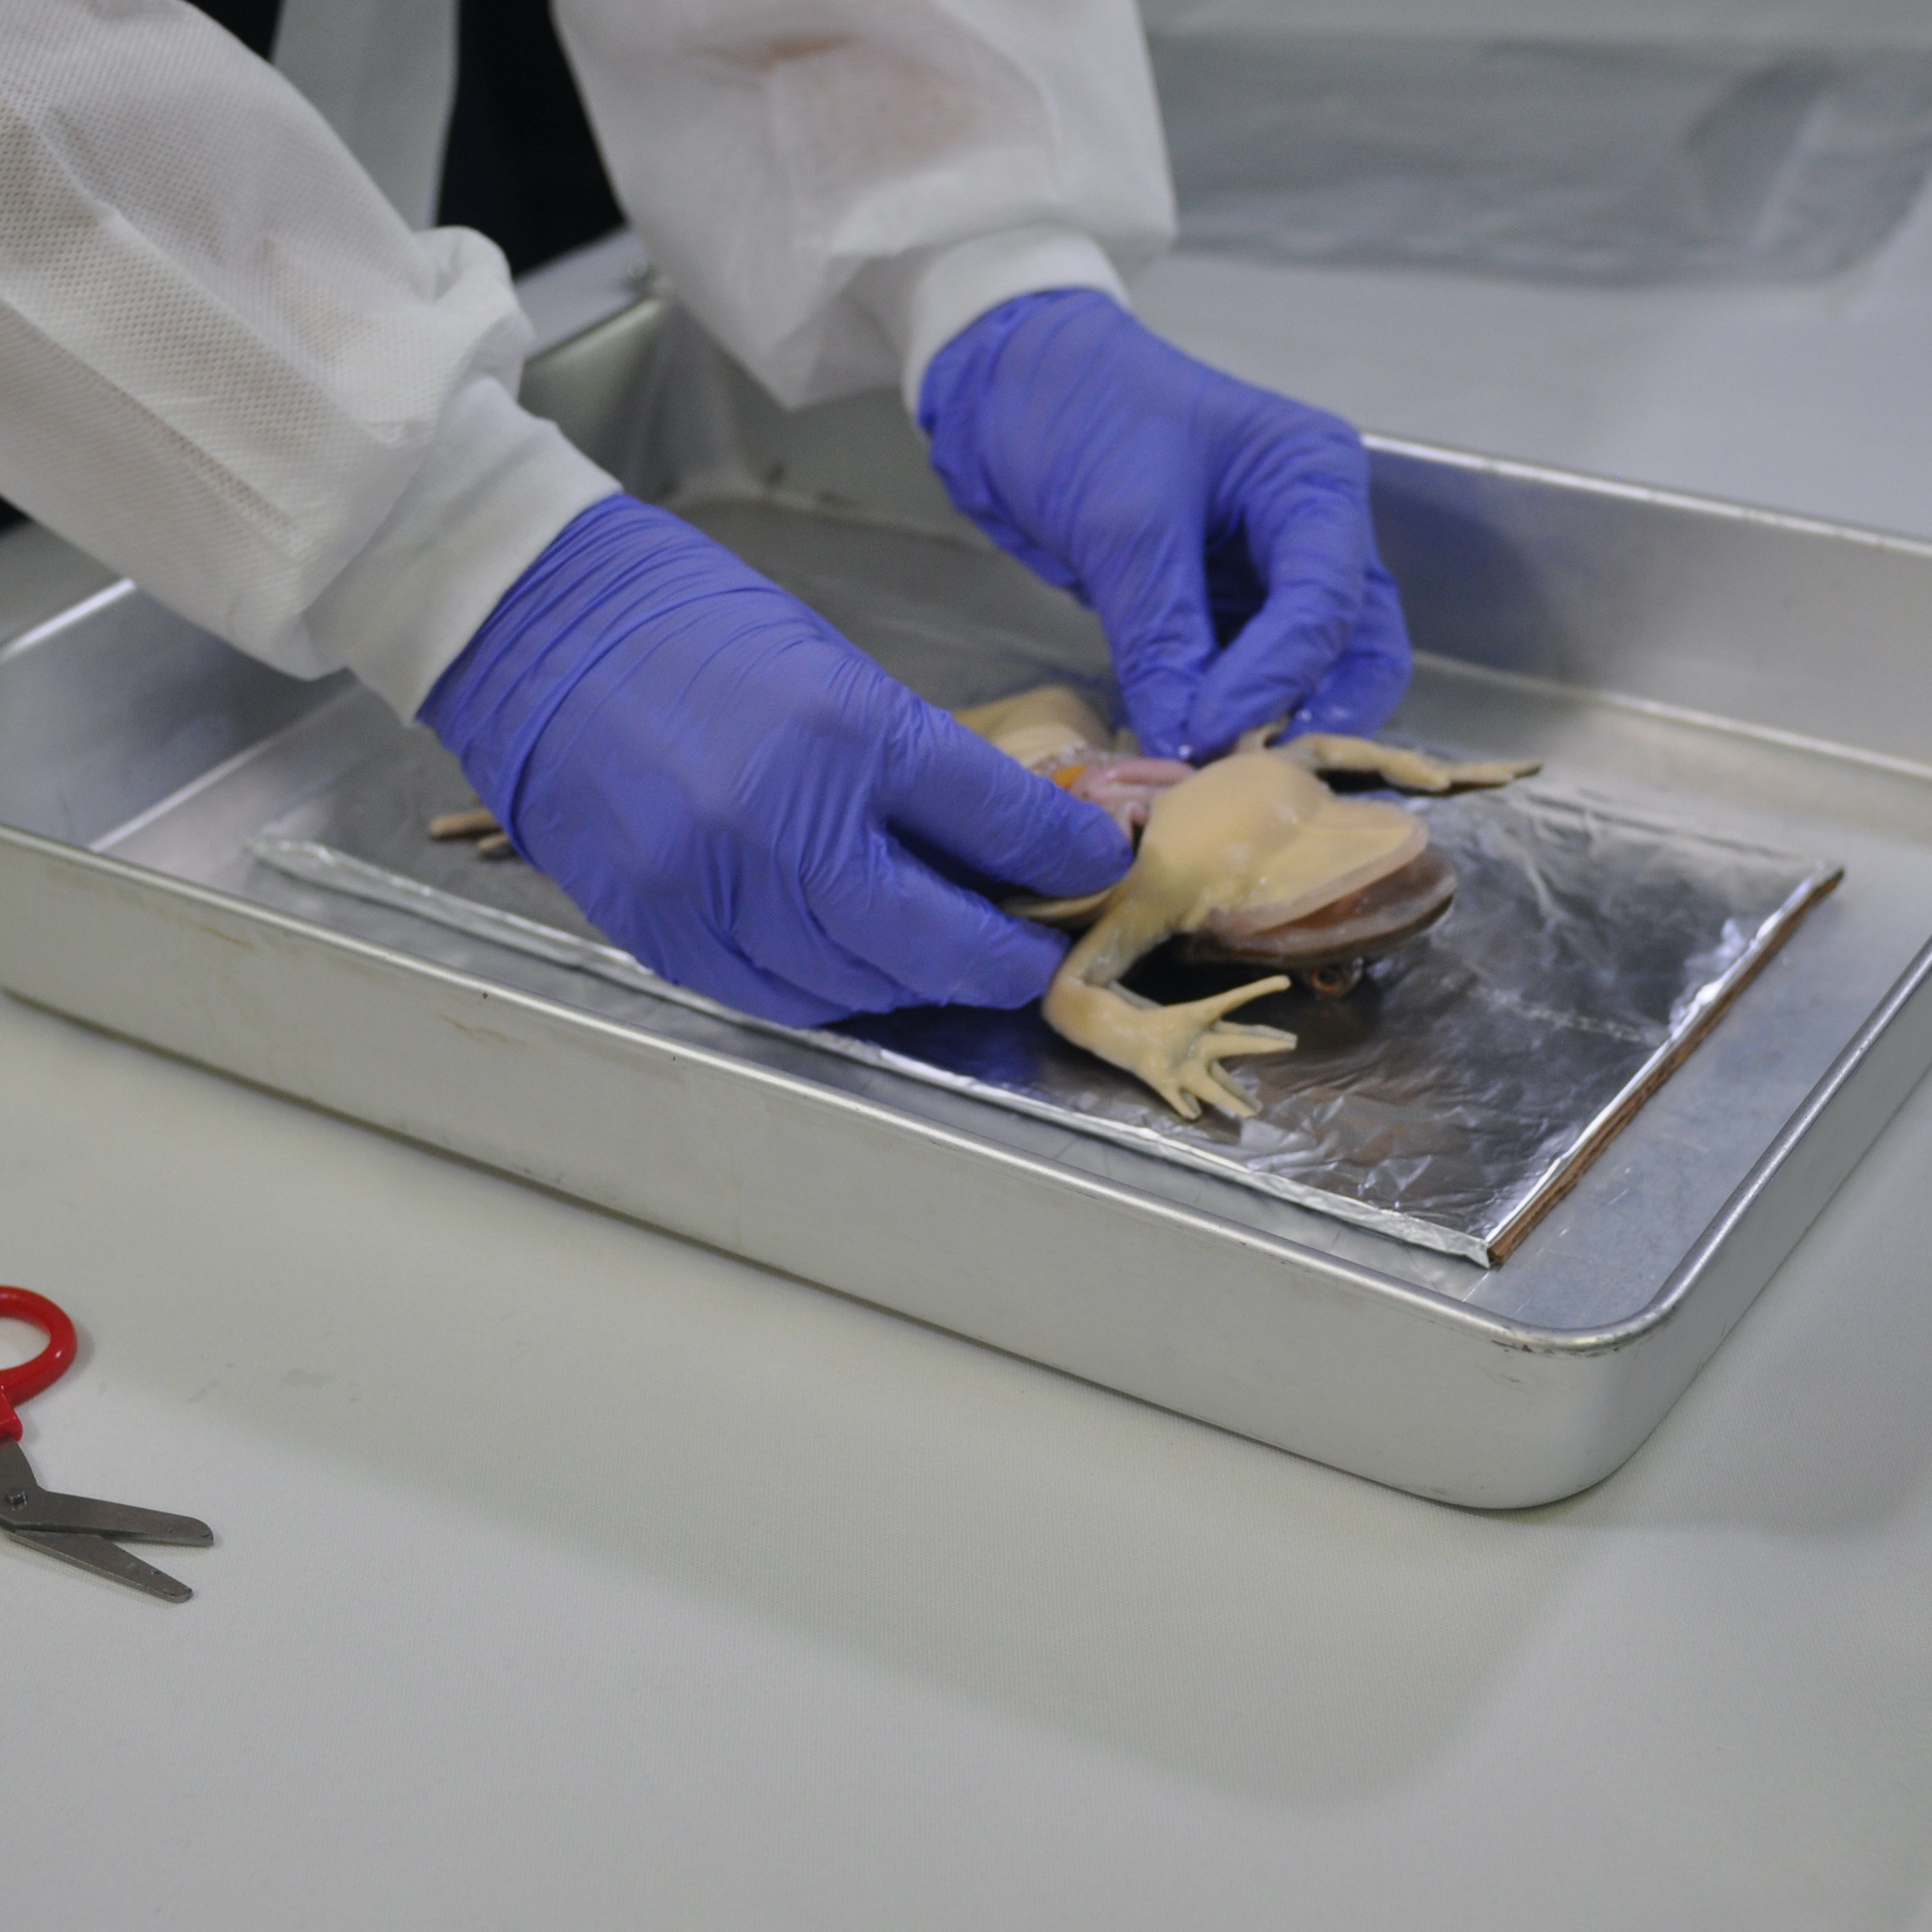 SynFrog synthetic frog being dissected on a metal tray